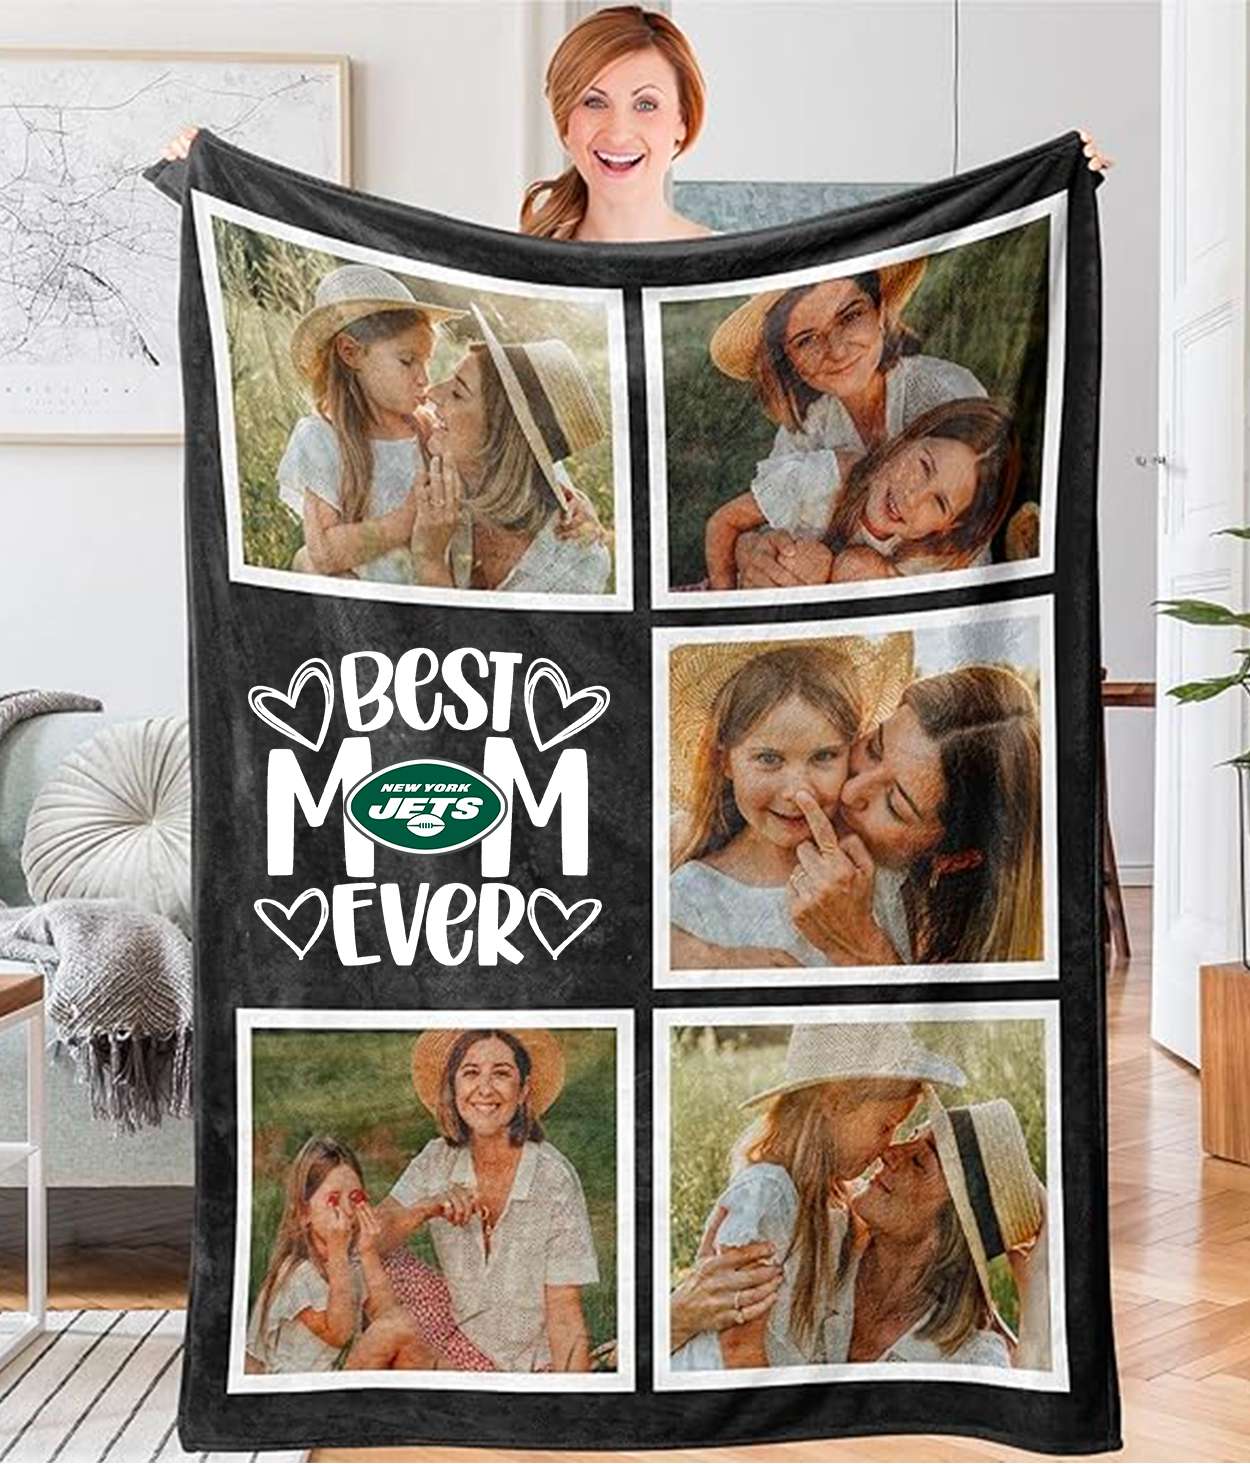 Best Mom Ever - Custom NFL New York Jets Blankets with Pictures for Mother's Day Gift